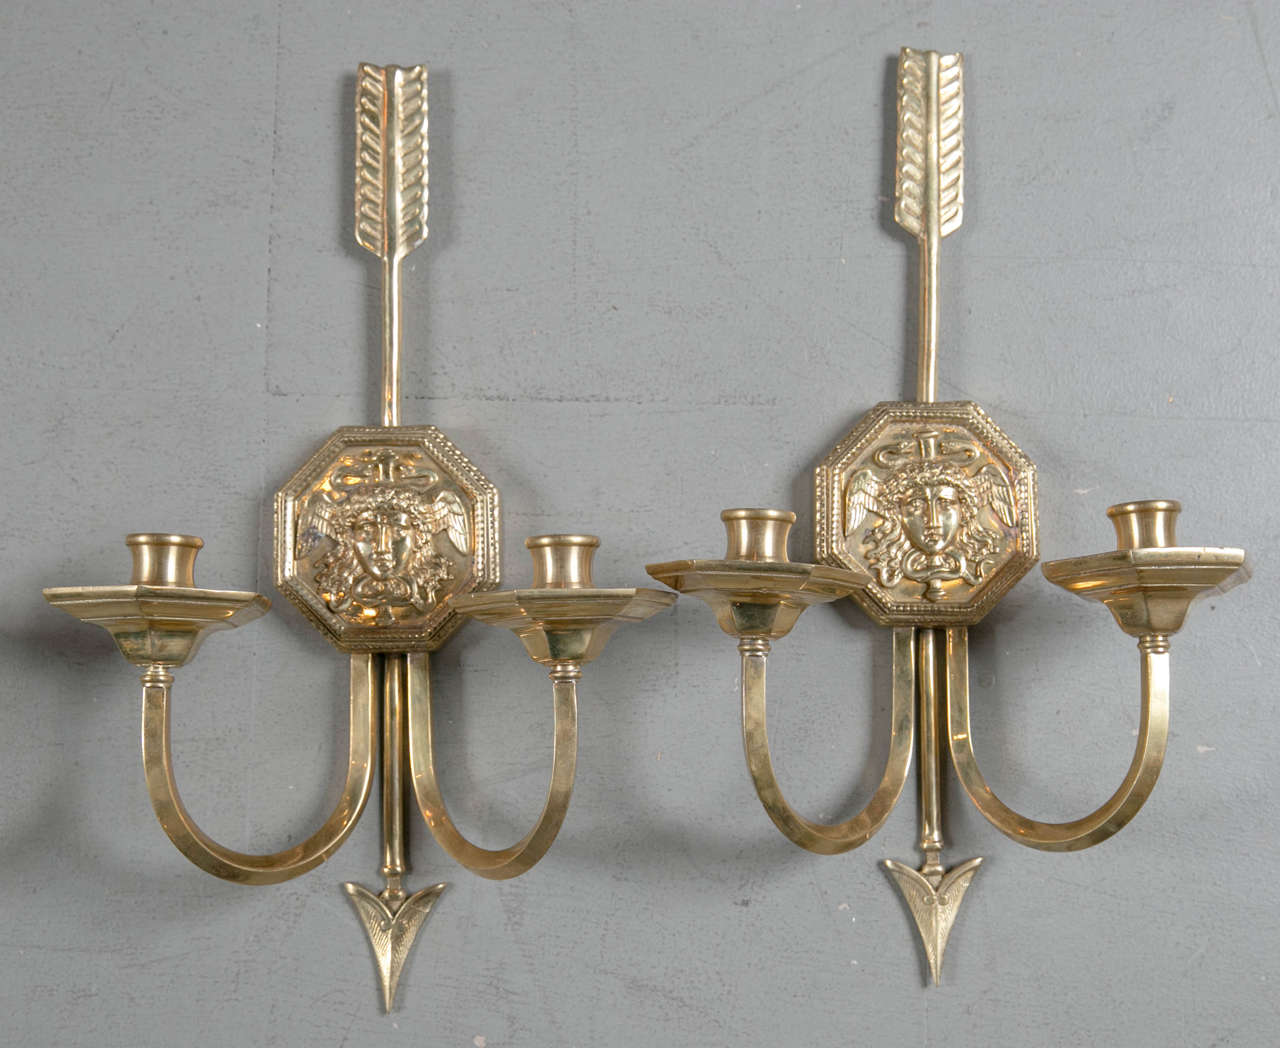  Pair of gilt bronze, empire style Caldwell sconces. Four available, priced per pair.